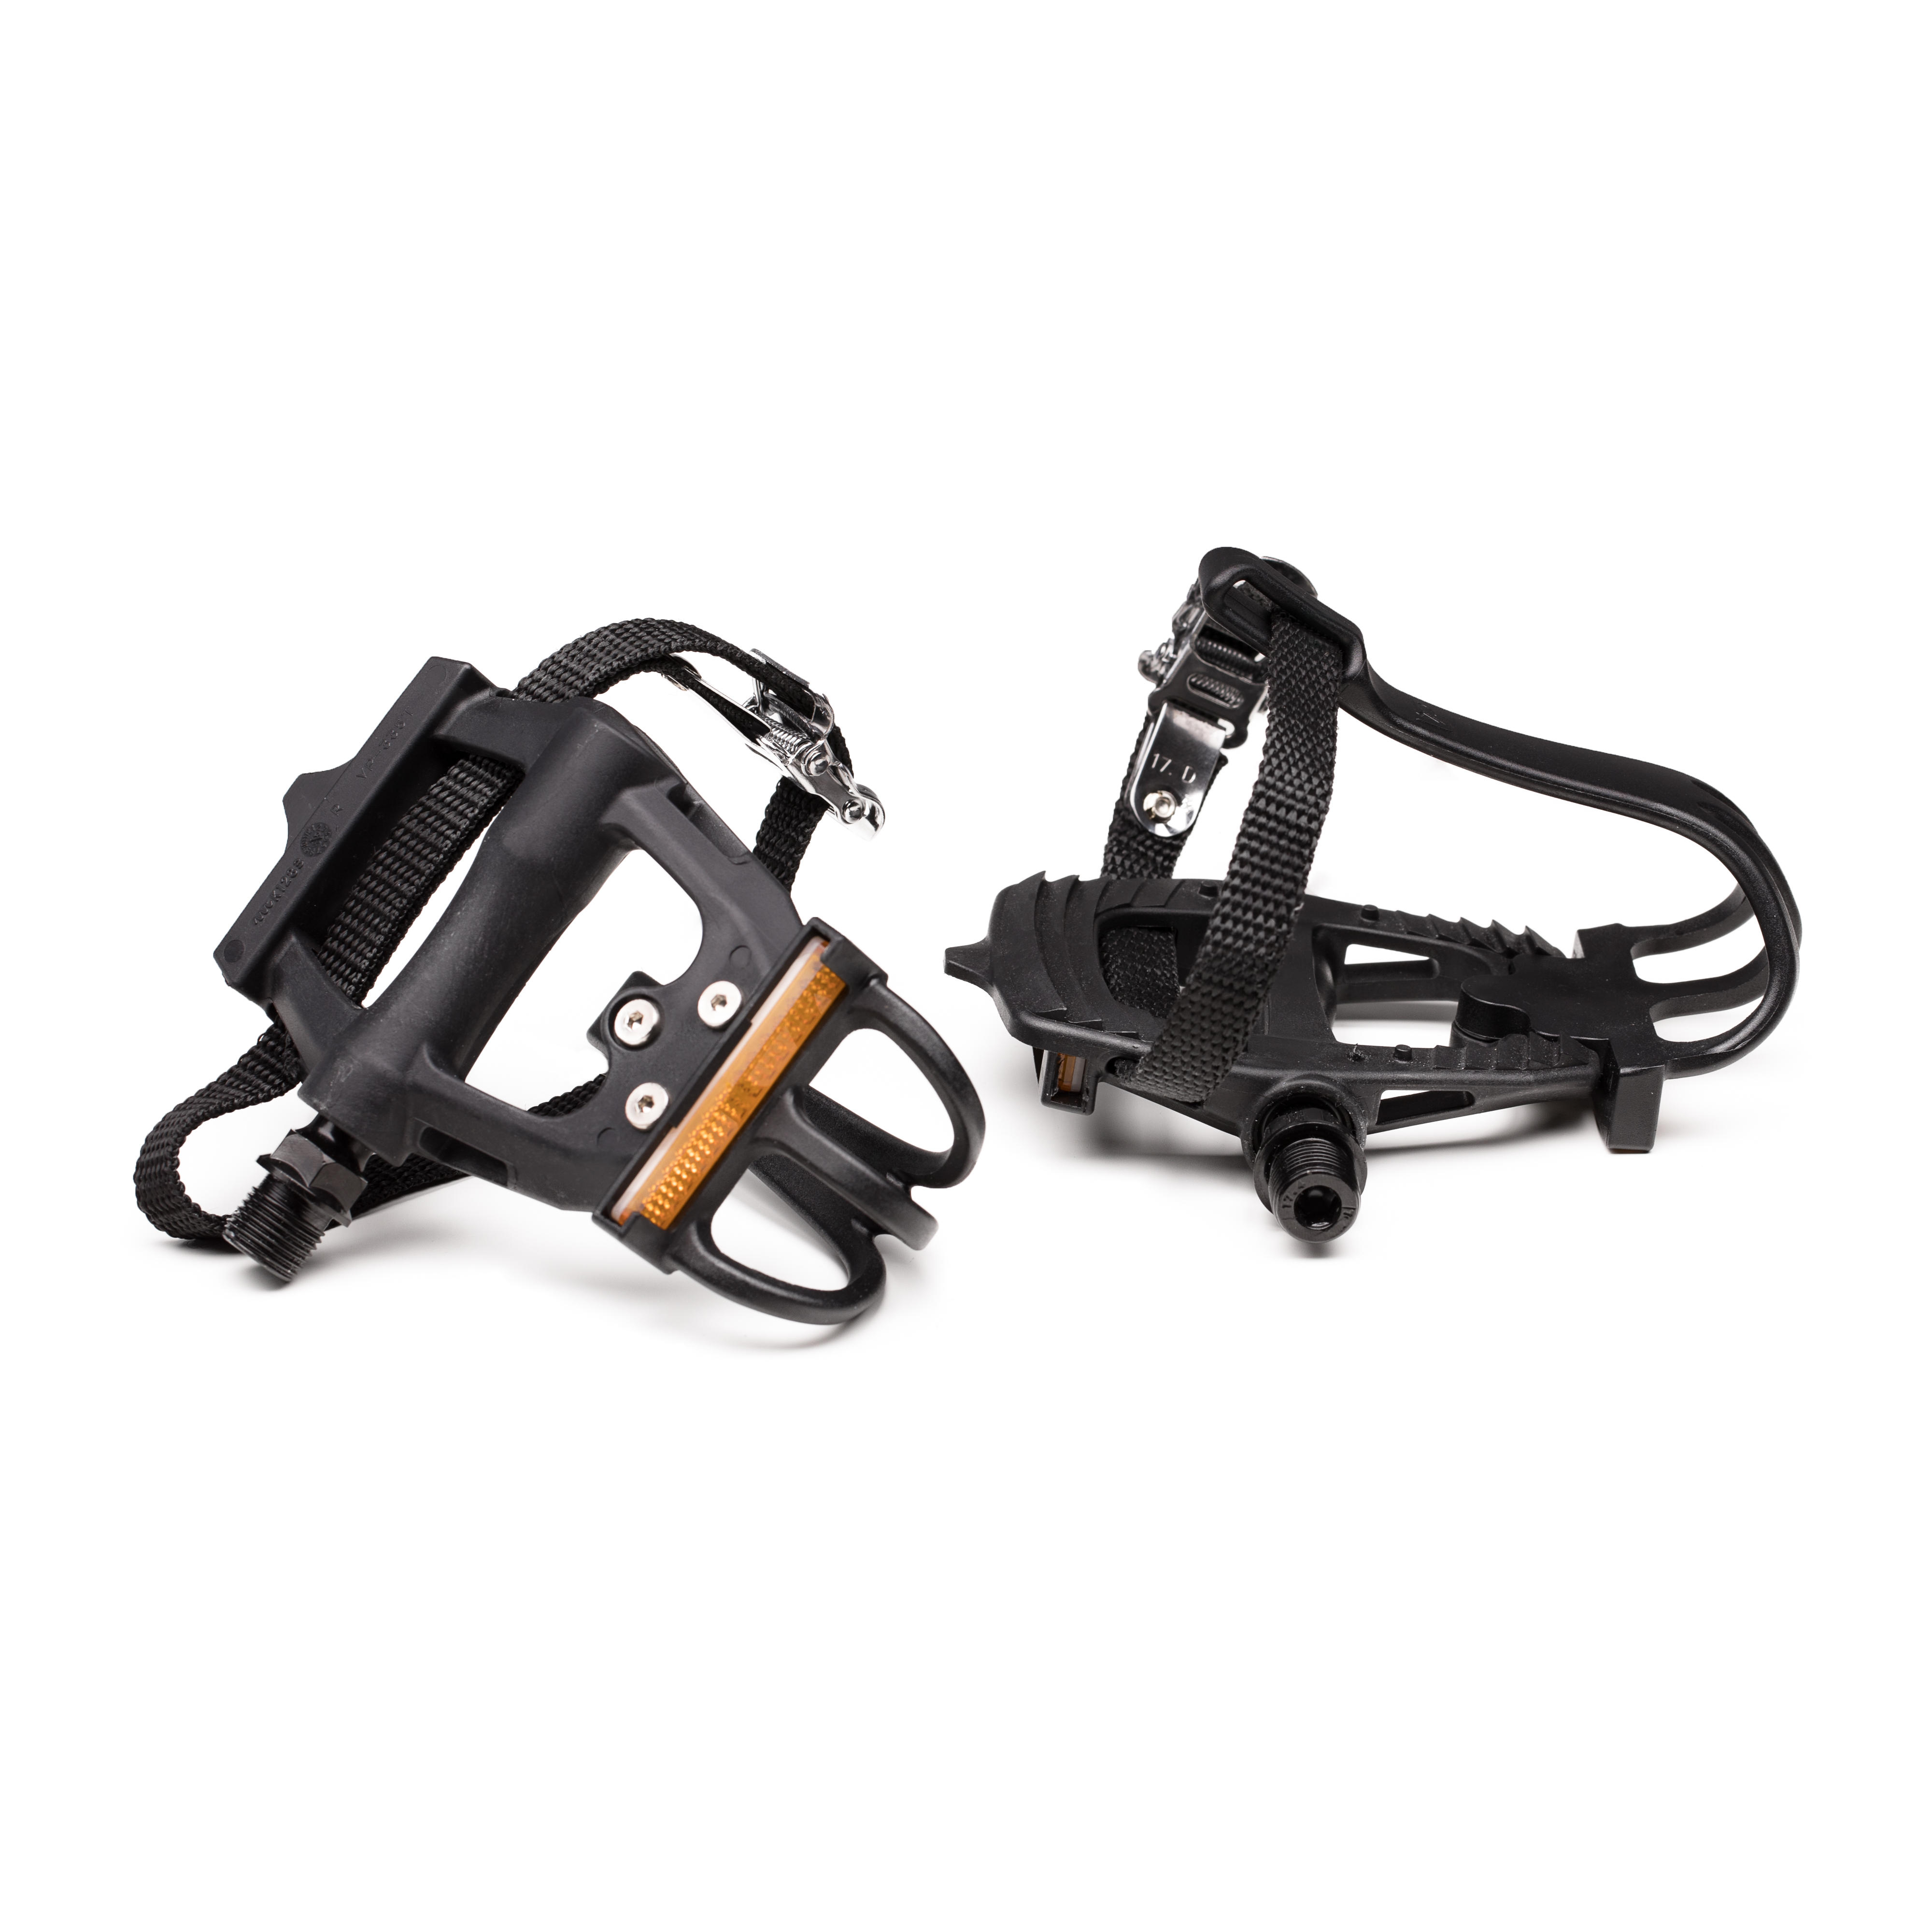 100 Resin Road Biking Pedals with Toe Clips - BTWIN